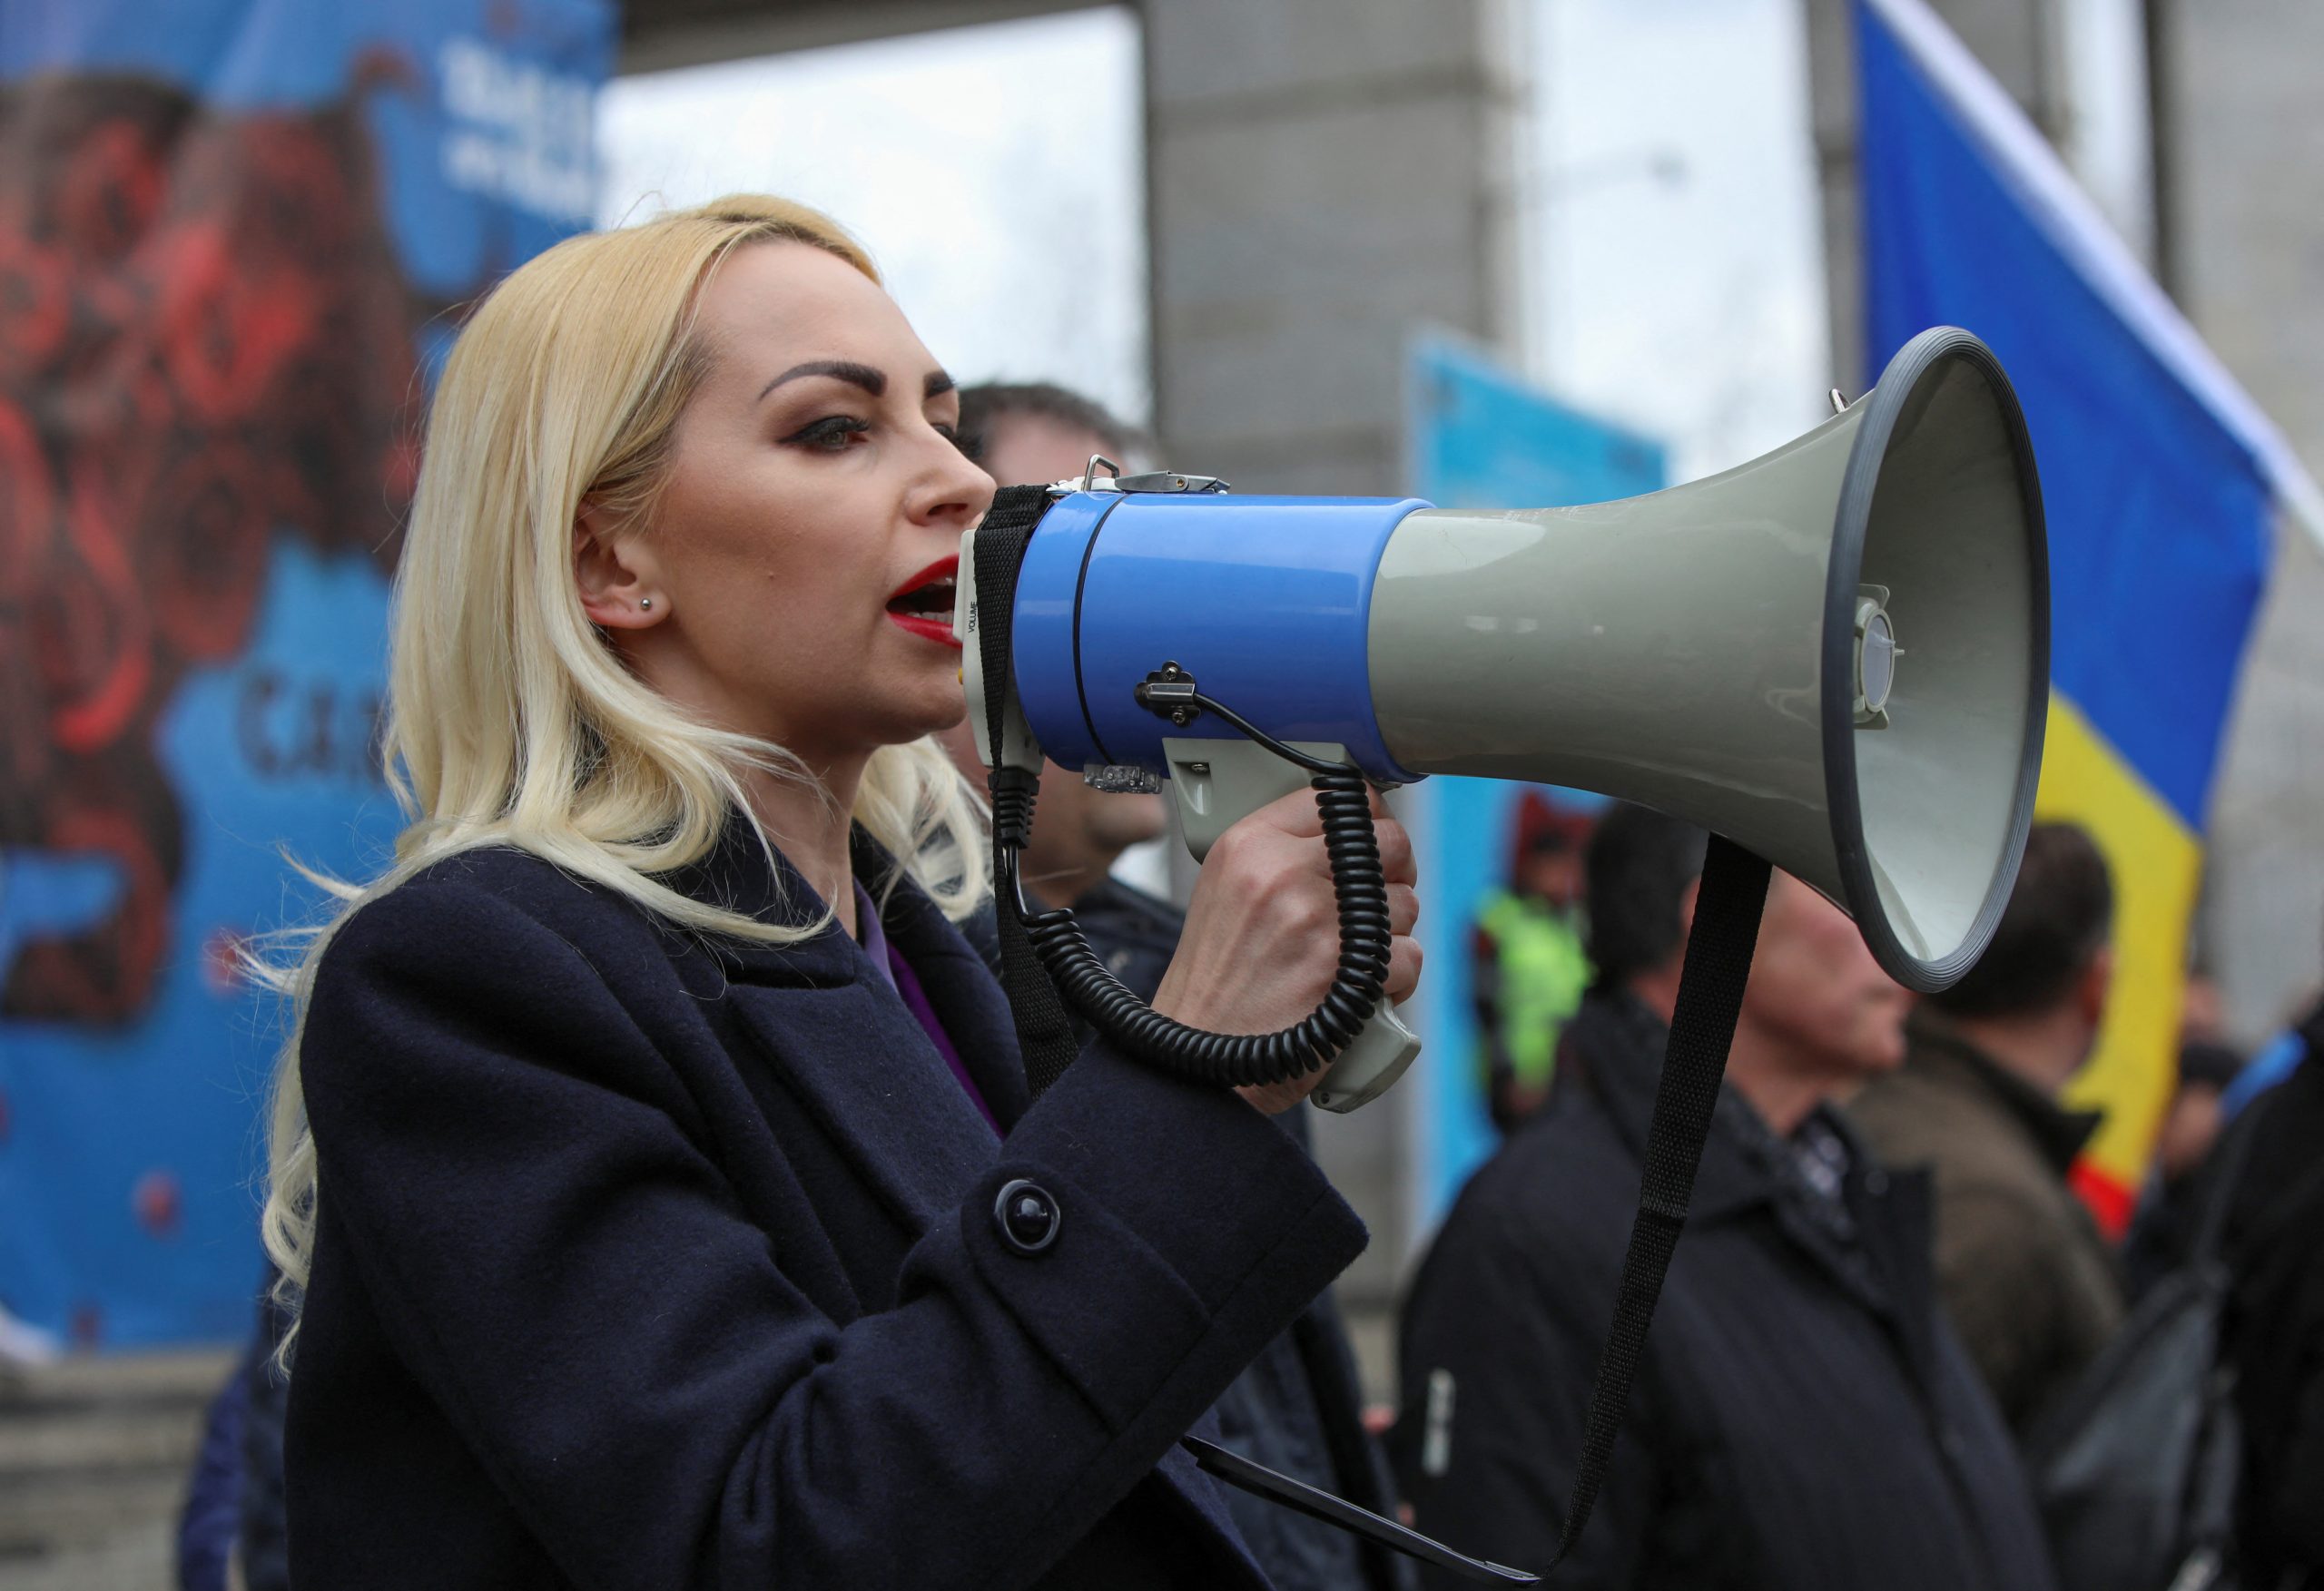 Photo: Marina Tauber, a member of the political party Shor, addresses supporters during an opposition rally to protest against the recent countrywide increase of power rates and prices in Chisinau, Moldova, February 19, 2023. Credit: REUTERS/Vladislav Culiomza